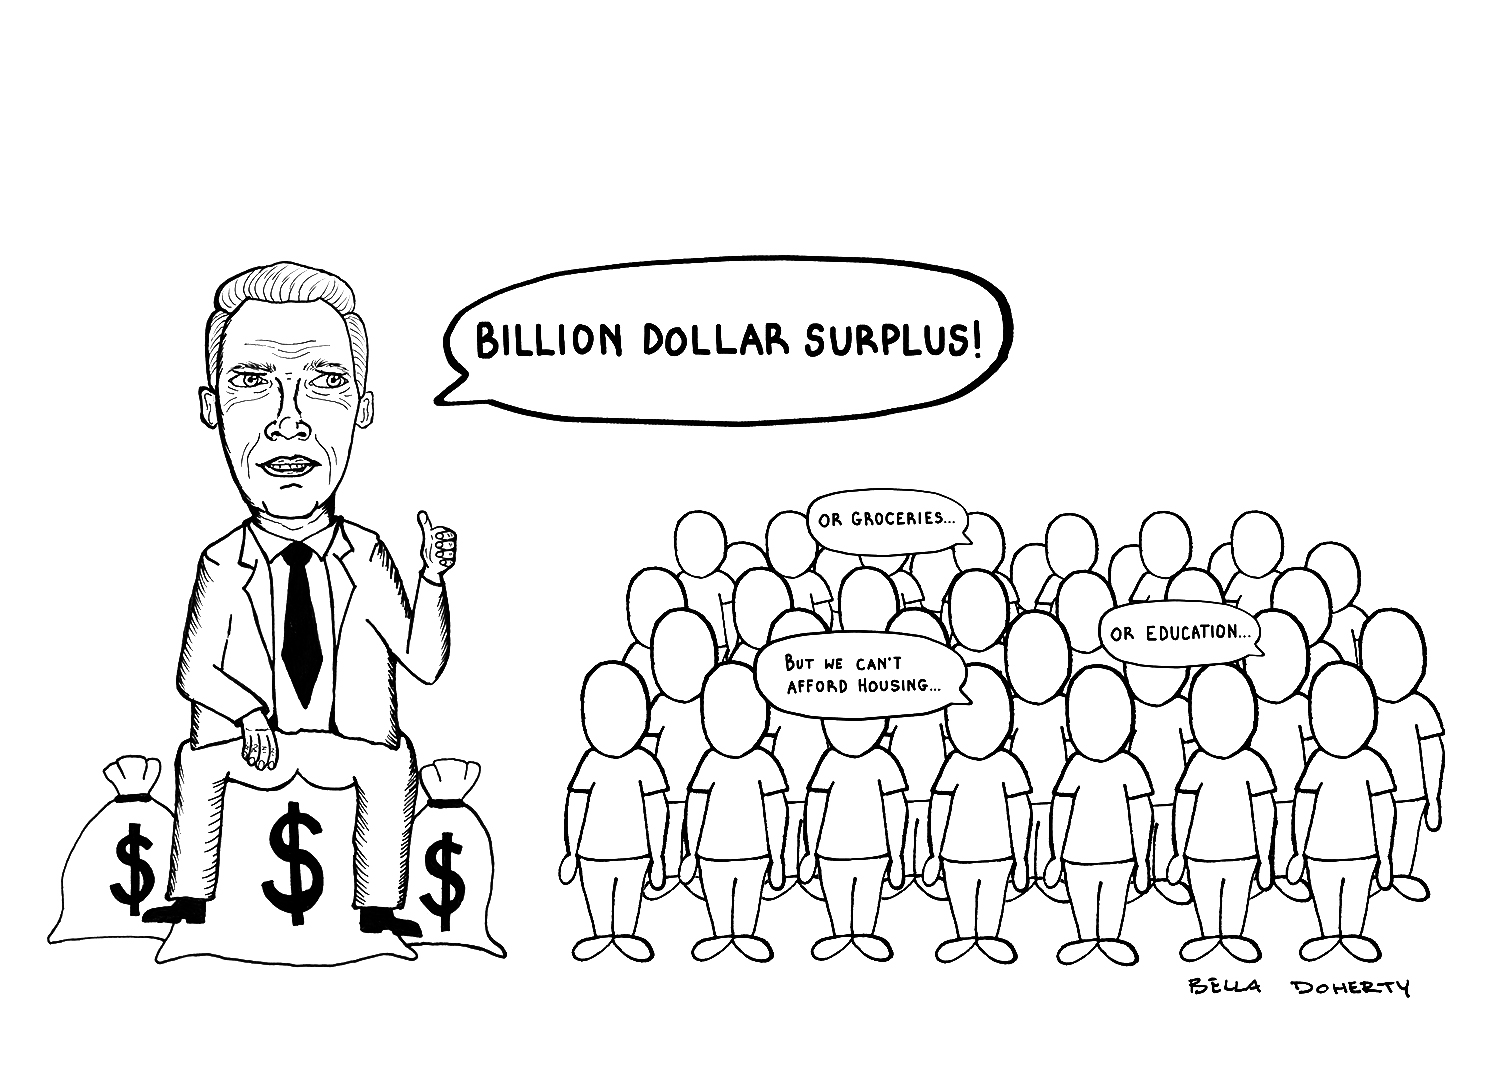 cartoon of politician with sacks with dollar signs on them with speech bubble stating "Billion dollar surplus!" to the right is a group of people with speech bubble stating "But we can't afford housing" "...Or groceries" "...Or education"